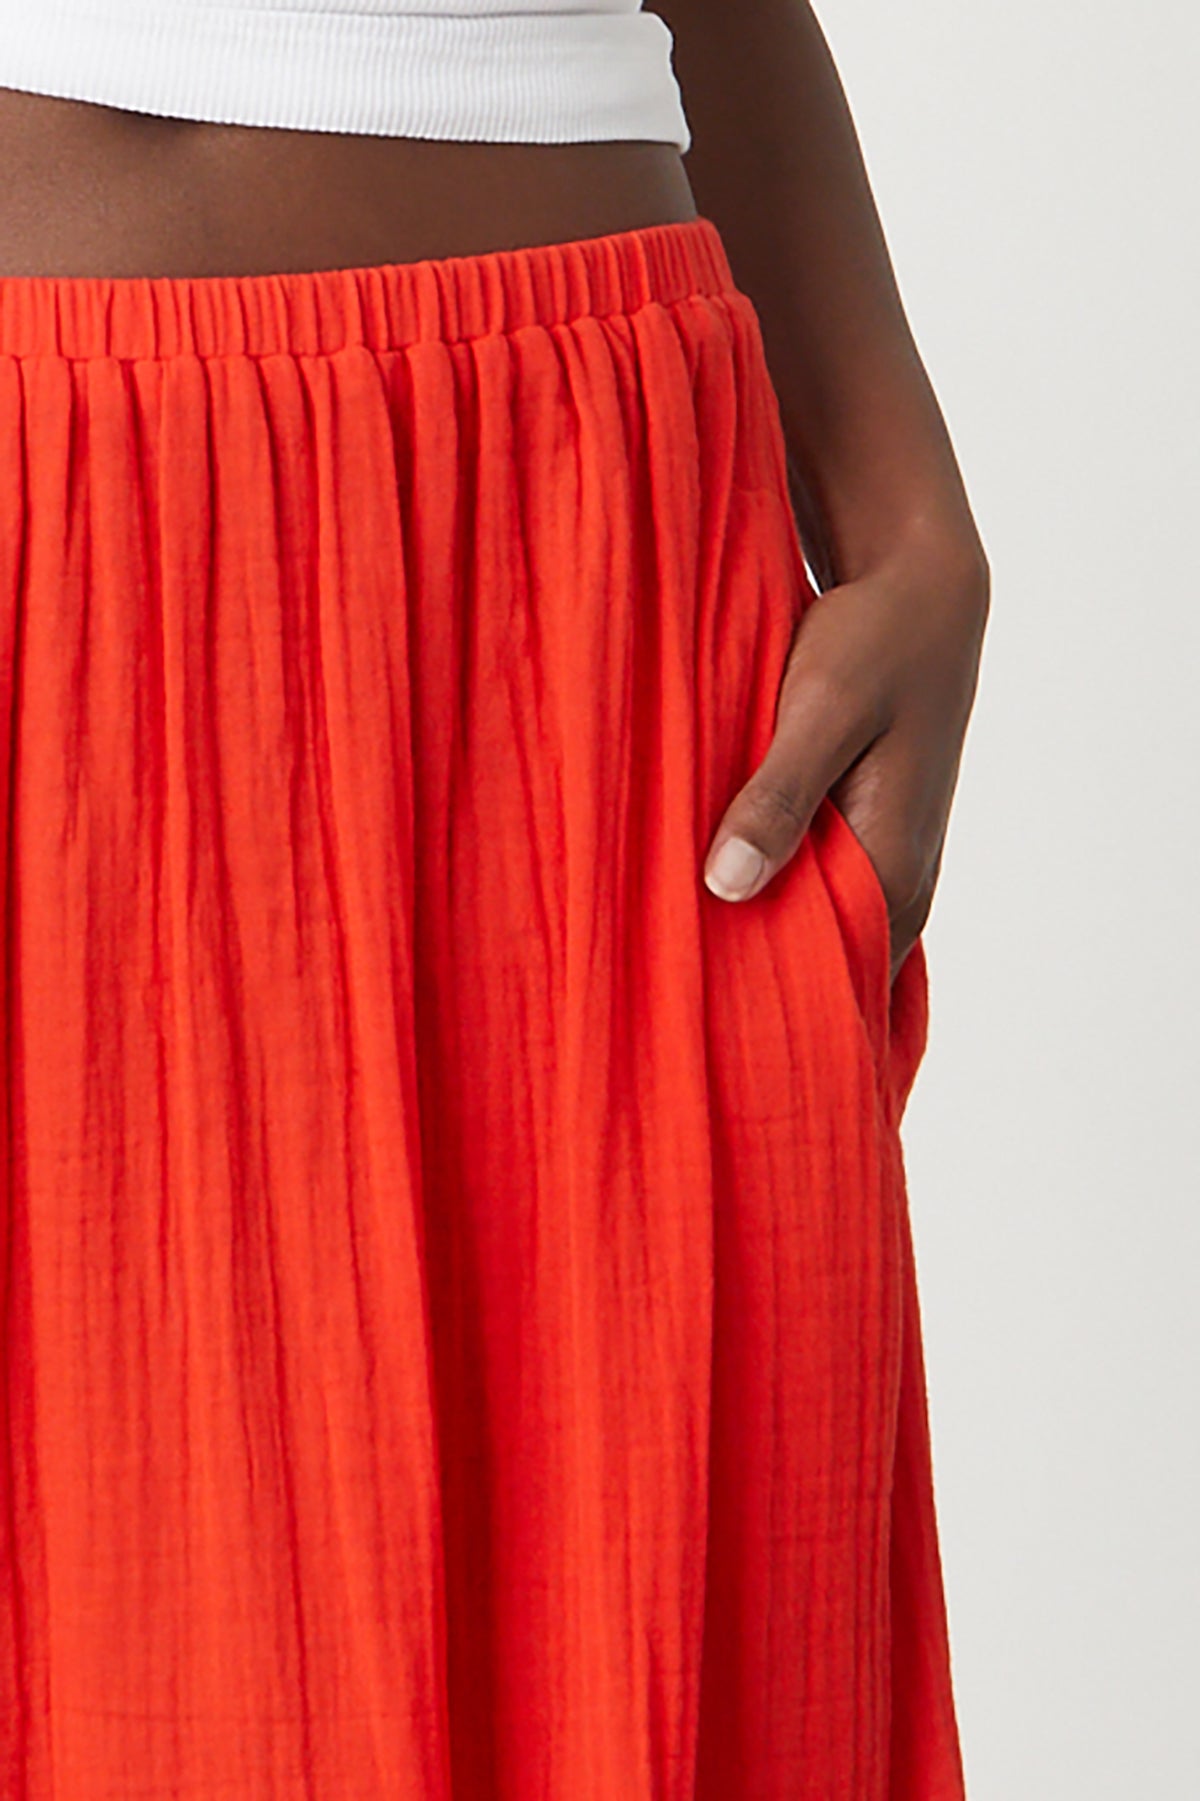 Mckenna Tiered Skirt in bright cardinal red close up front detail with model's hand in pocket-26255713566913